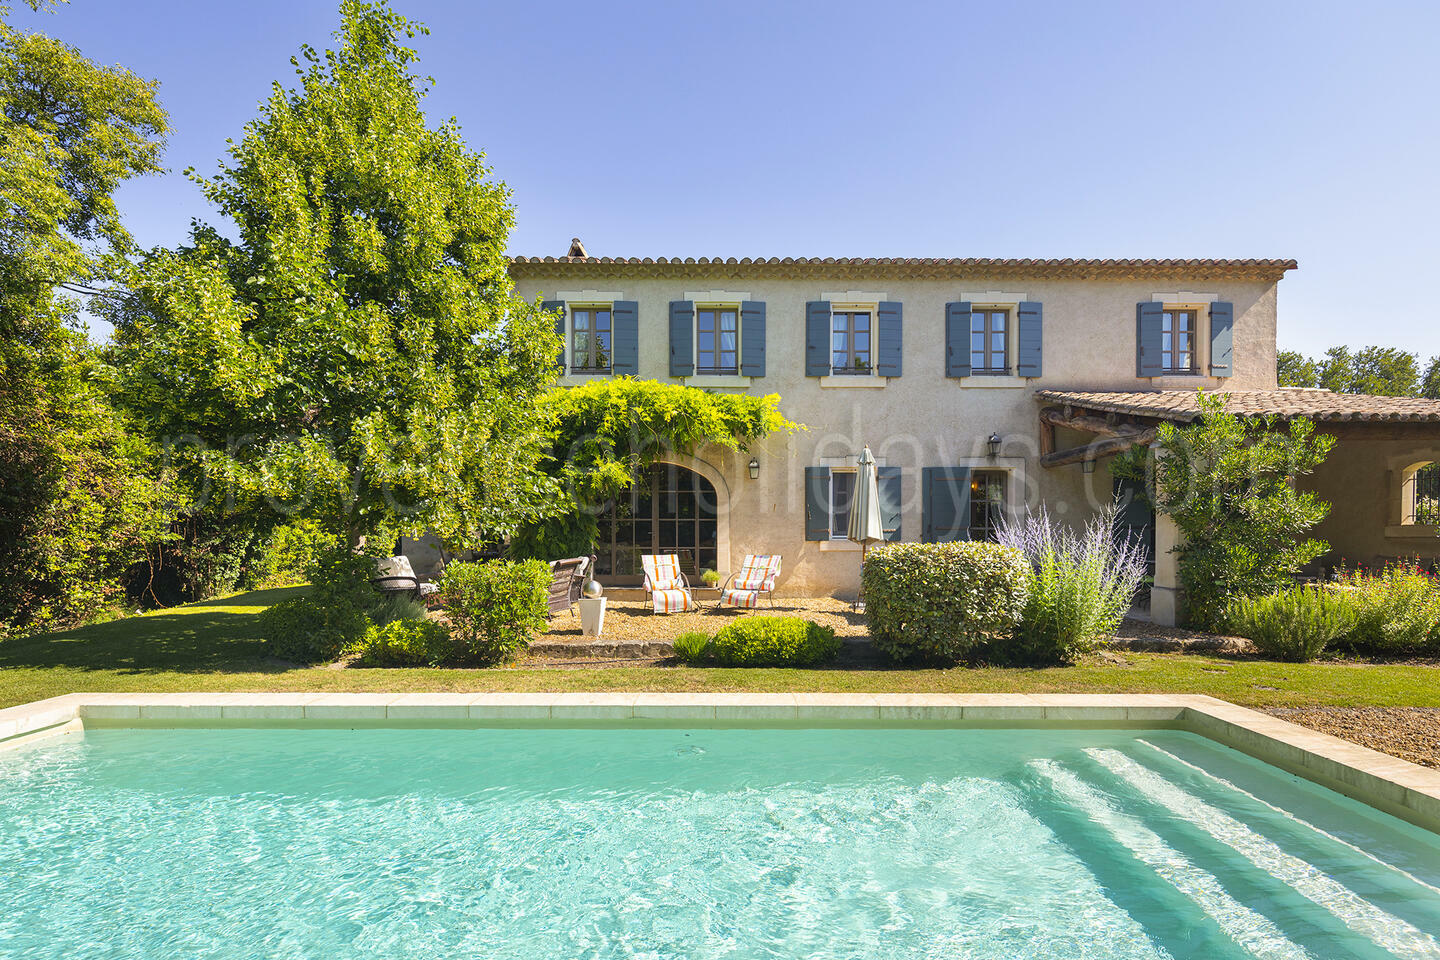 Air-conditioned Bastide with swimming pool near the centre of Saint-Rémy 1 - Air-conditioned Bastide with swimming pool near the centre of Saint-Rémy: Villa: Pool